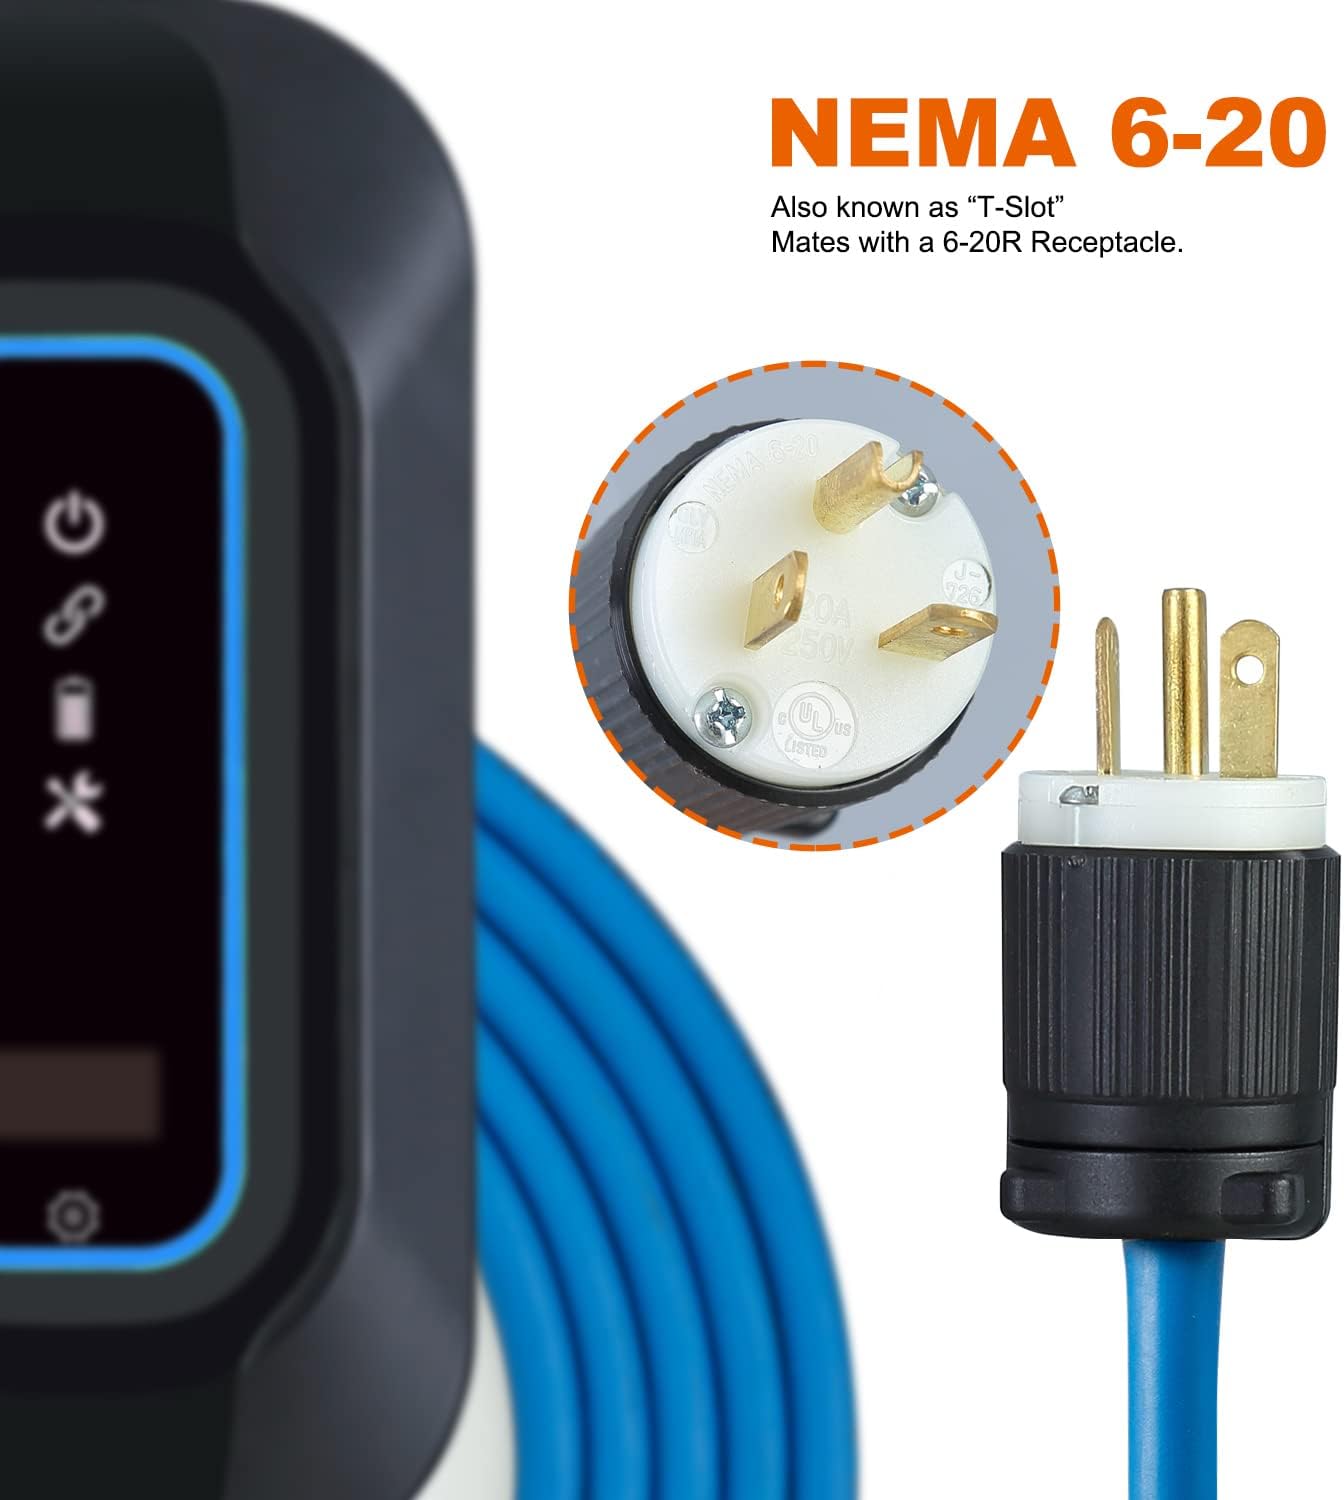 Vschnel Level 1-2 EV Charger 16Amp, NEMA 6-20 Portable Electric Vehicle Charger Cable Indoor/Outdoor Home Personal EV Charger for J1772